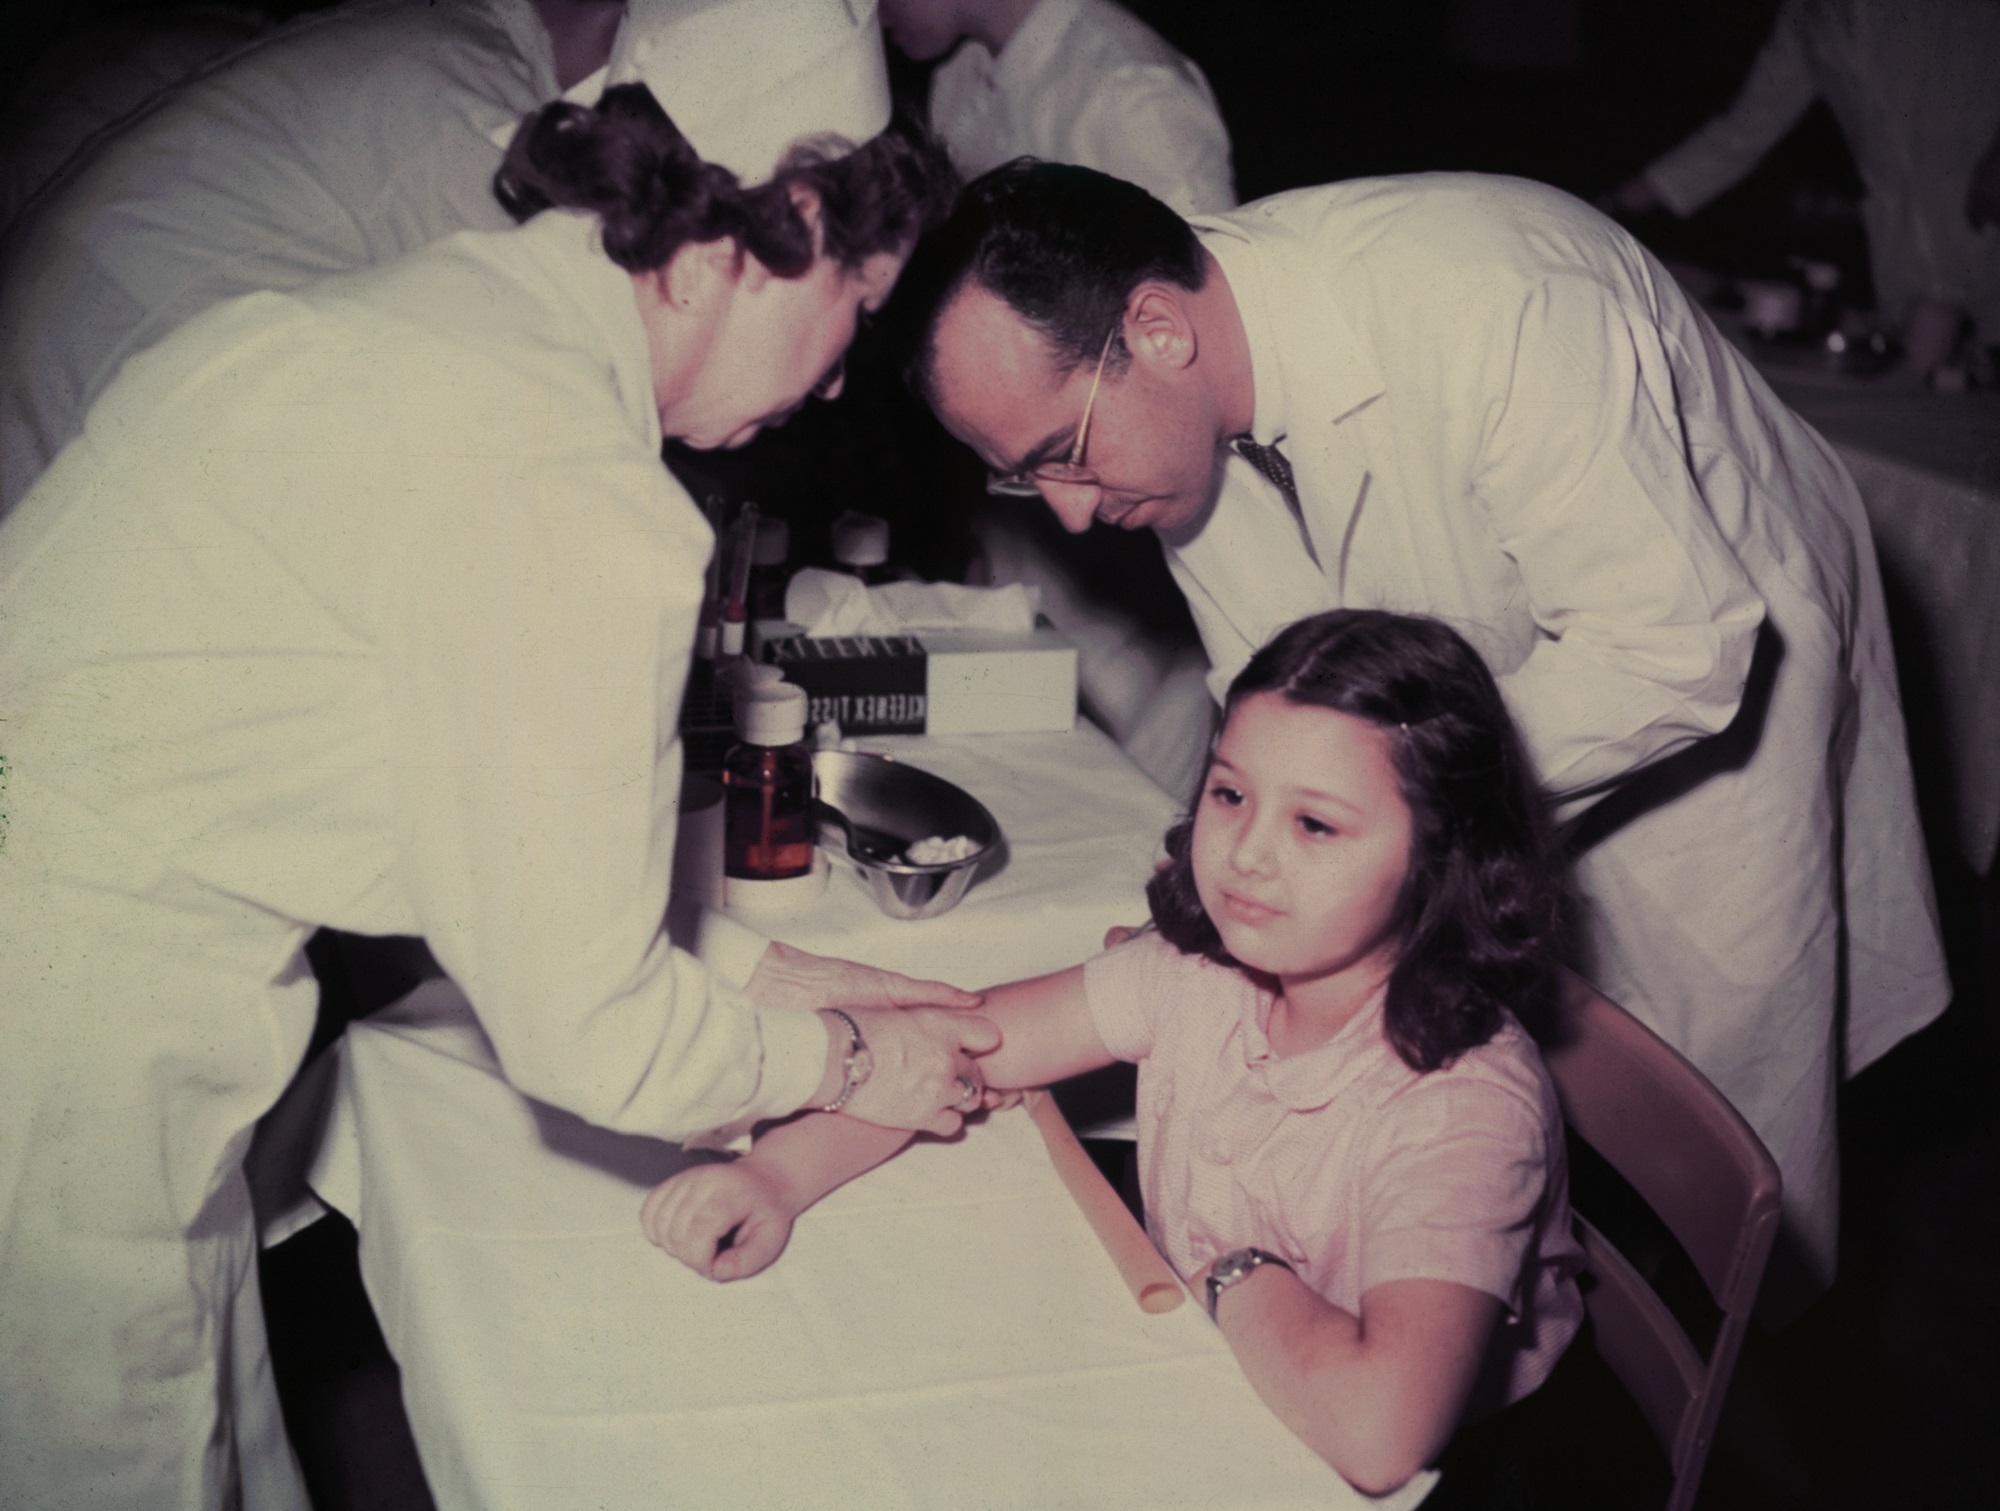 At right, Jonas Salk, the doctor behind the first polio vaccine, administers a shot to a kid in Pennsylvania in 1955.